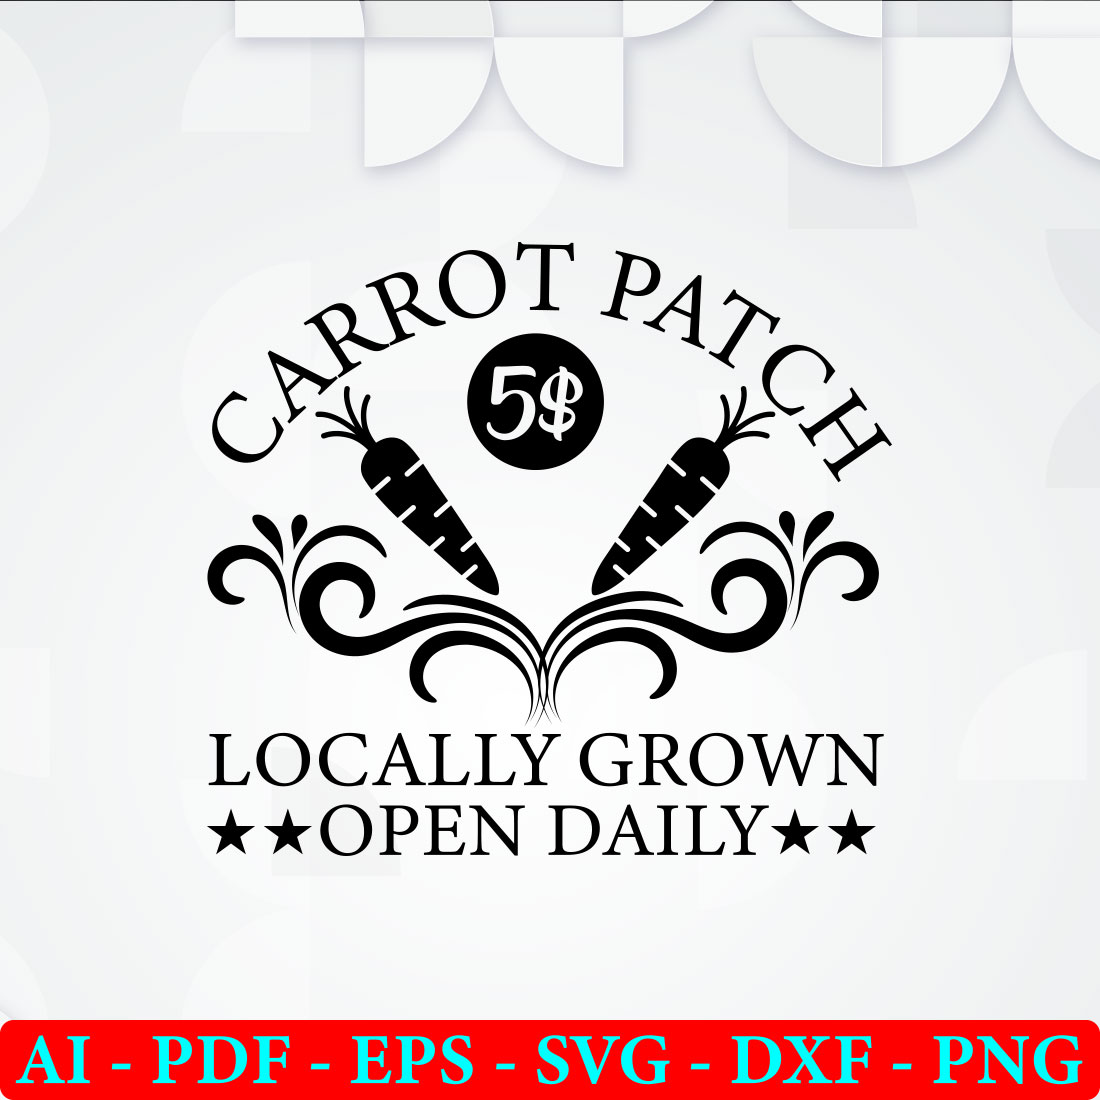 Logo for a local business called carrot patch.